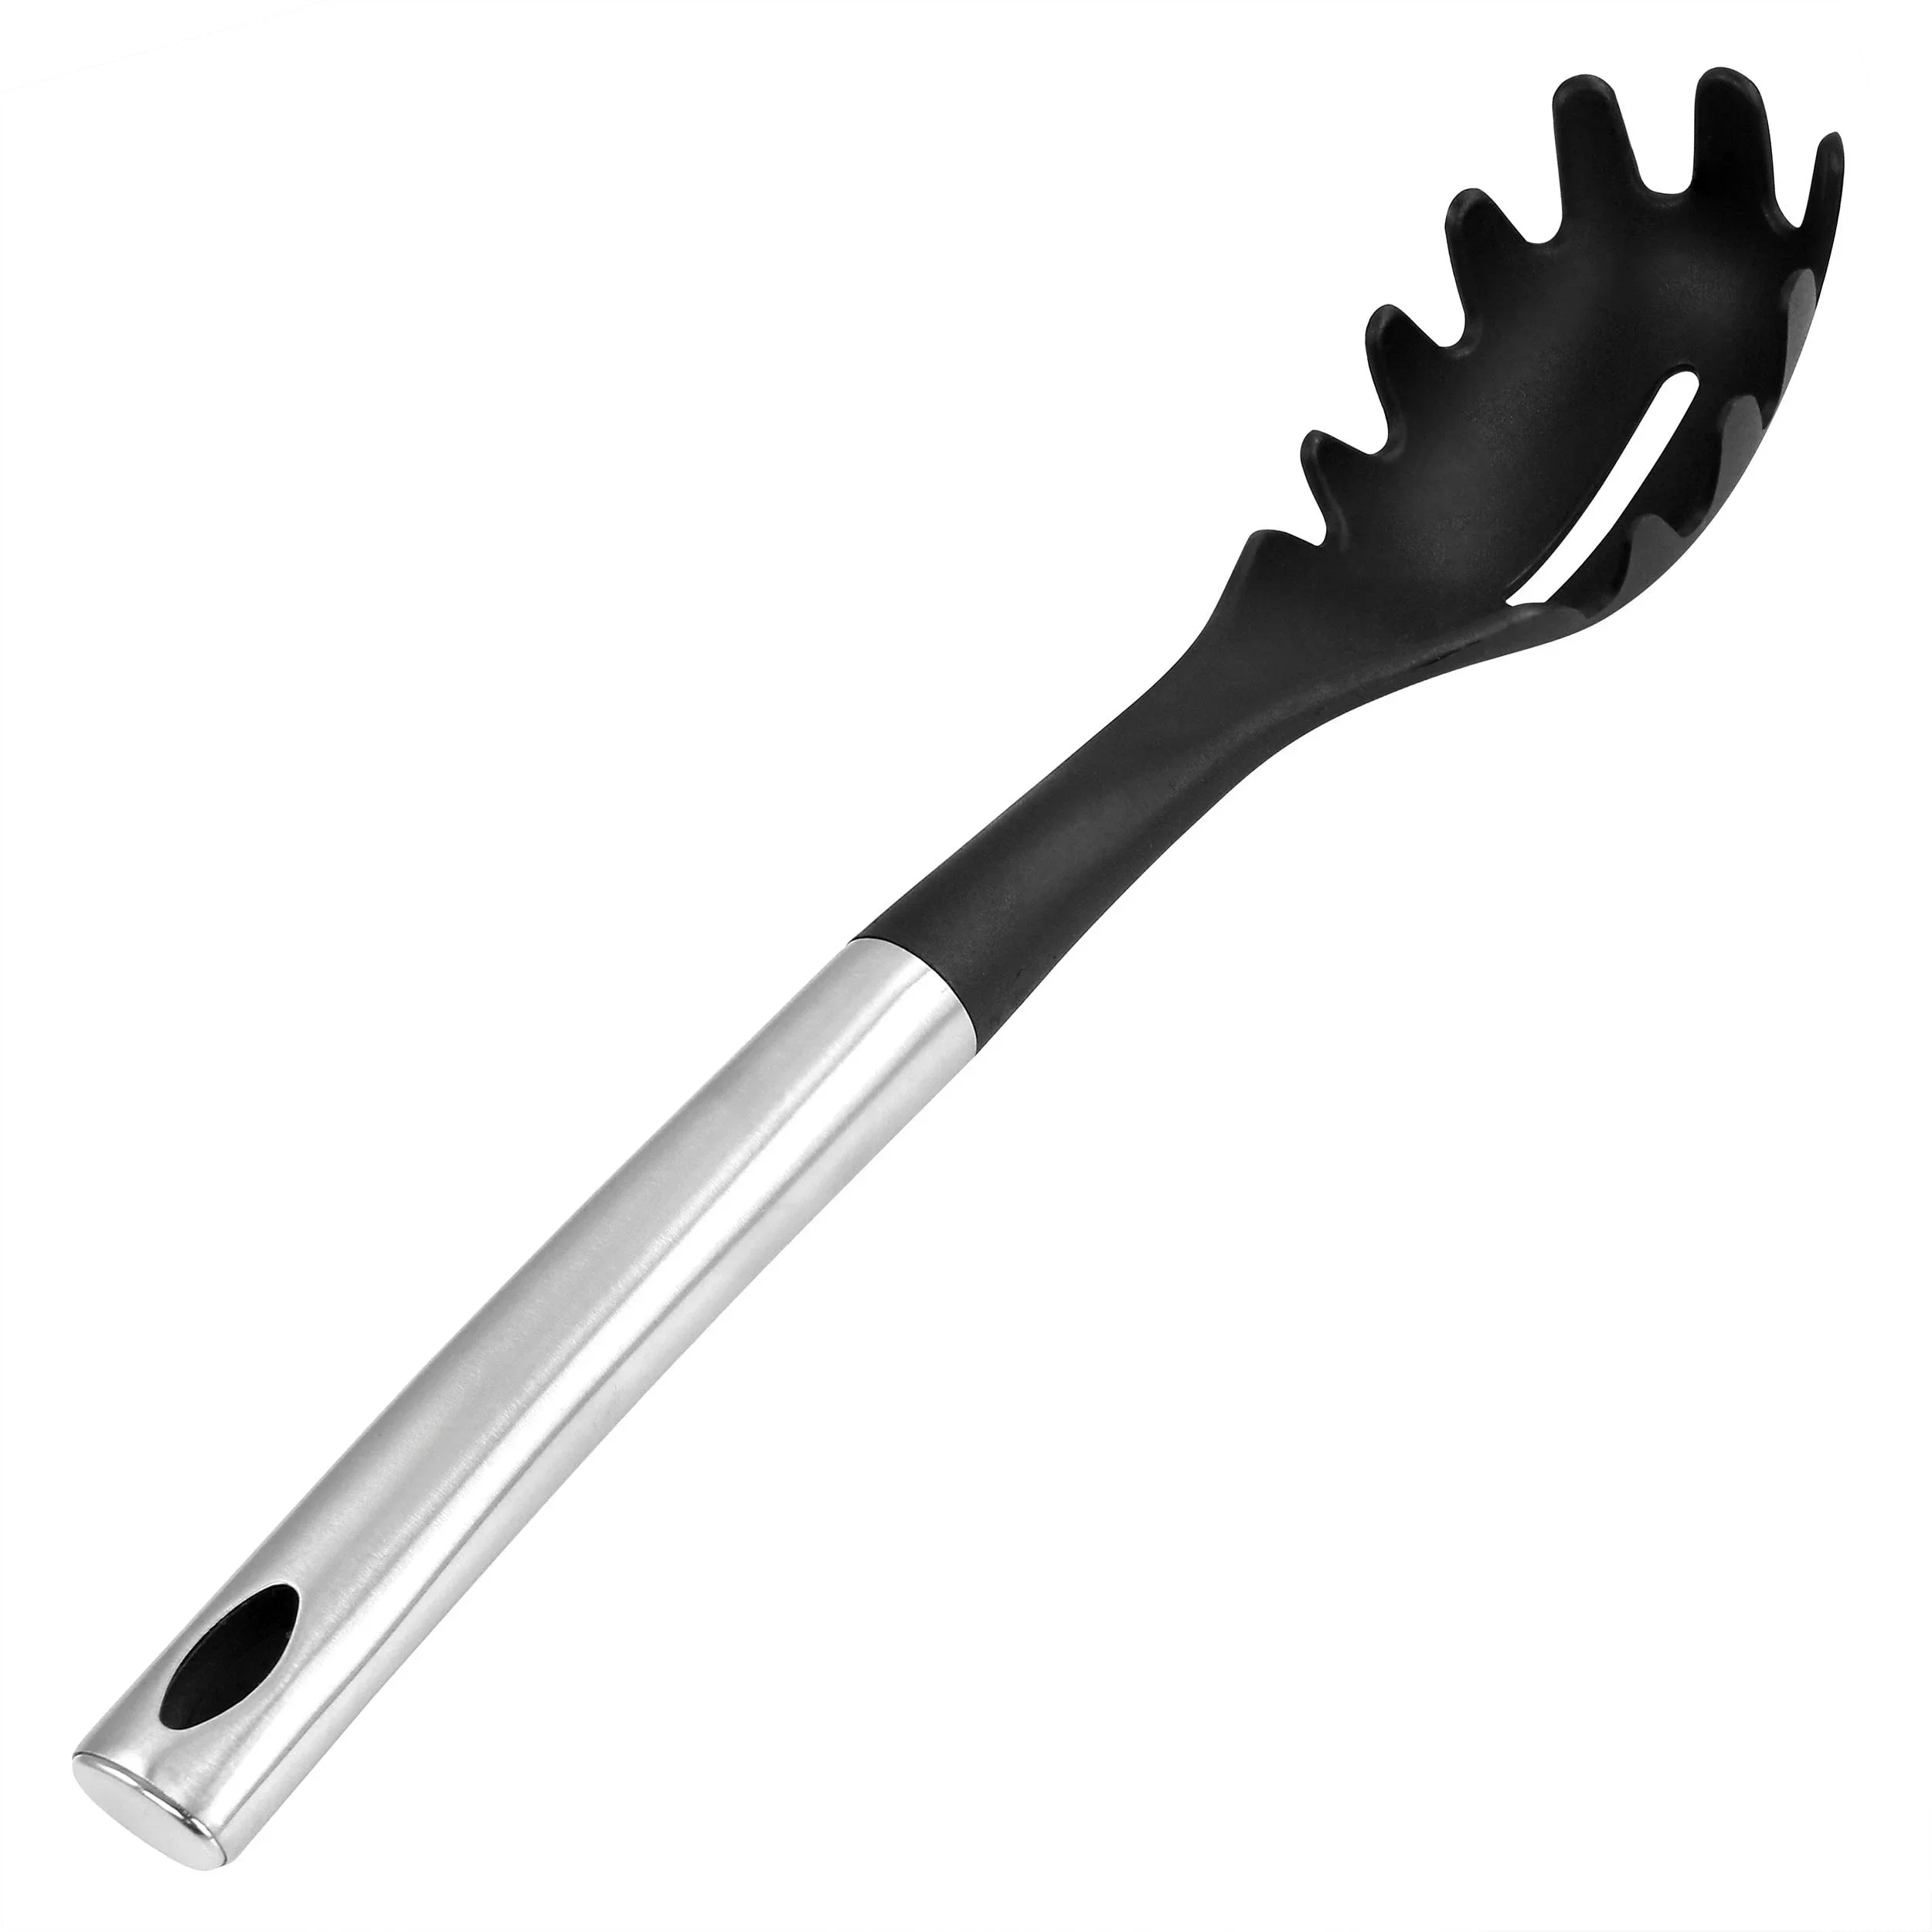 

Server Kitchen Utensil with Stainless Steel Handle, Kitchen Items, Kitchen Gadgets and Accessories Fast Transportation